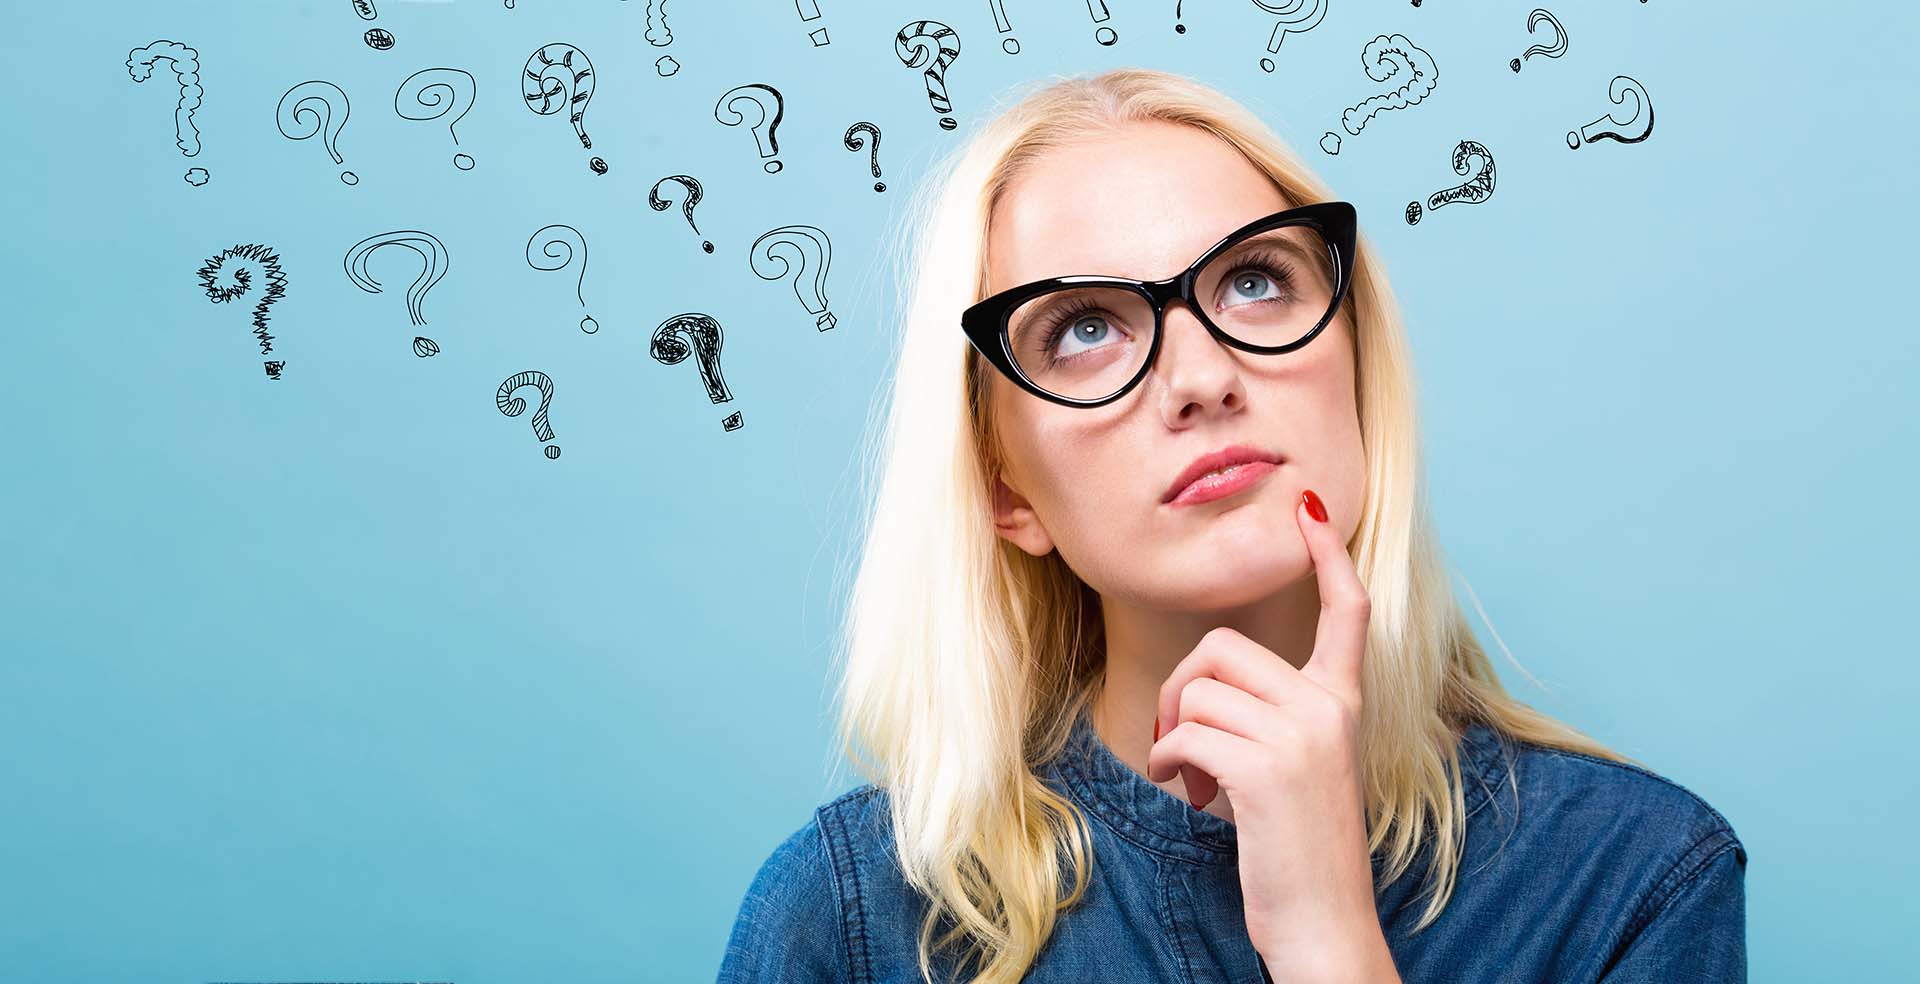 Background banner image of woman thinking of a question.